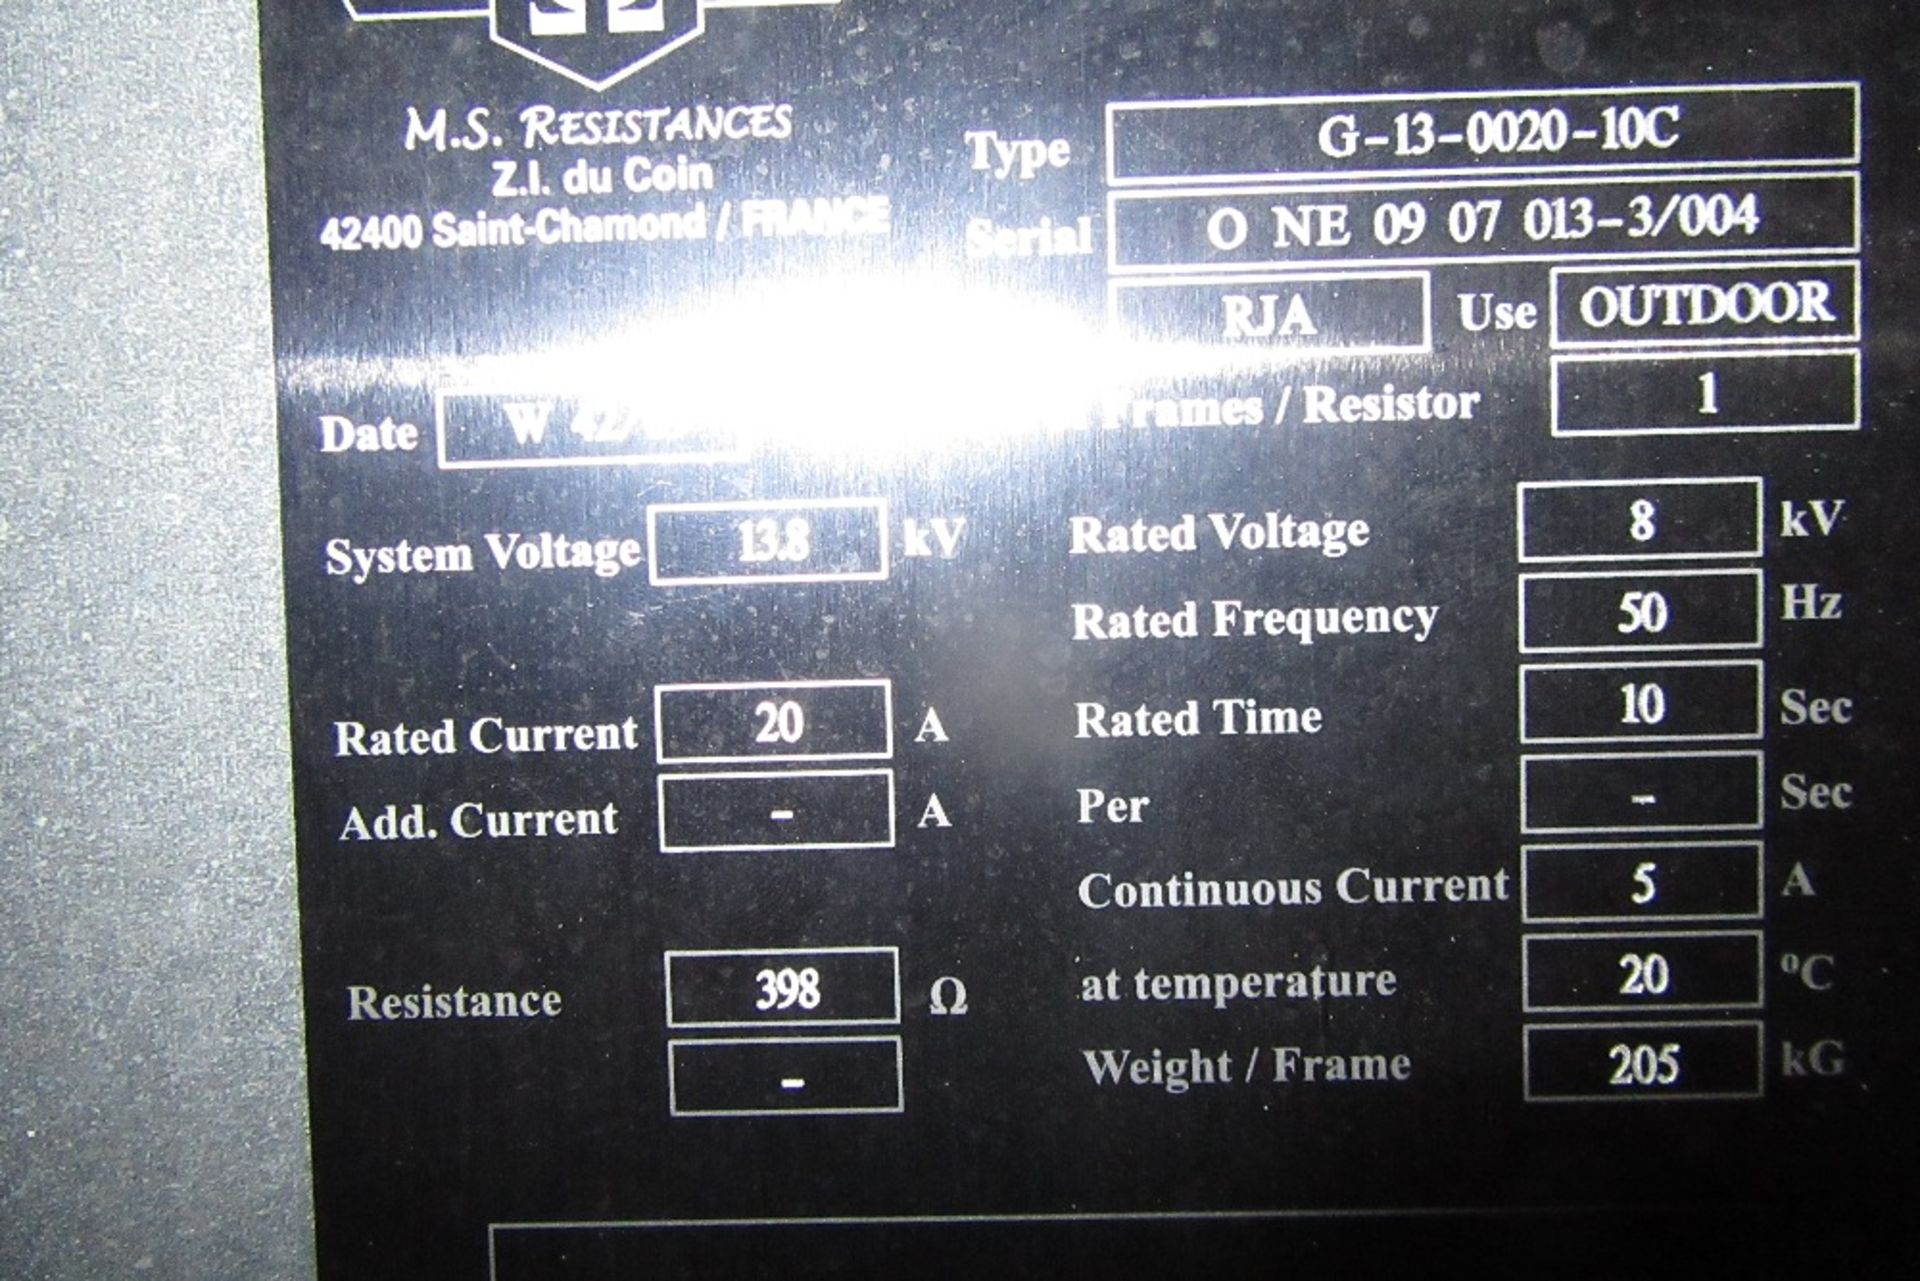 MS Resistance G-13-0020-10C Neutral Earthing Resistor Unit, Rated voltage: 8kV, Rated current: 20A, - Image 3 of 3